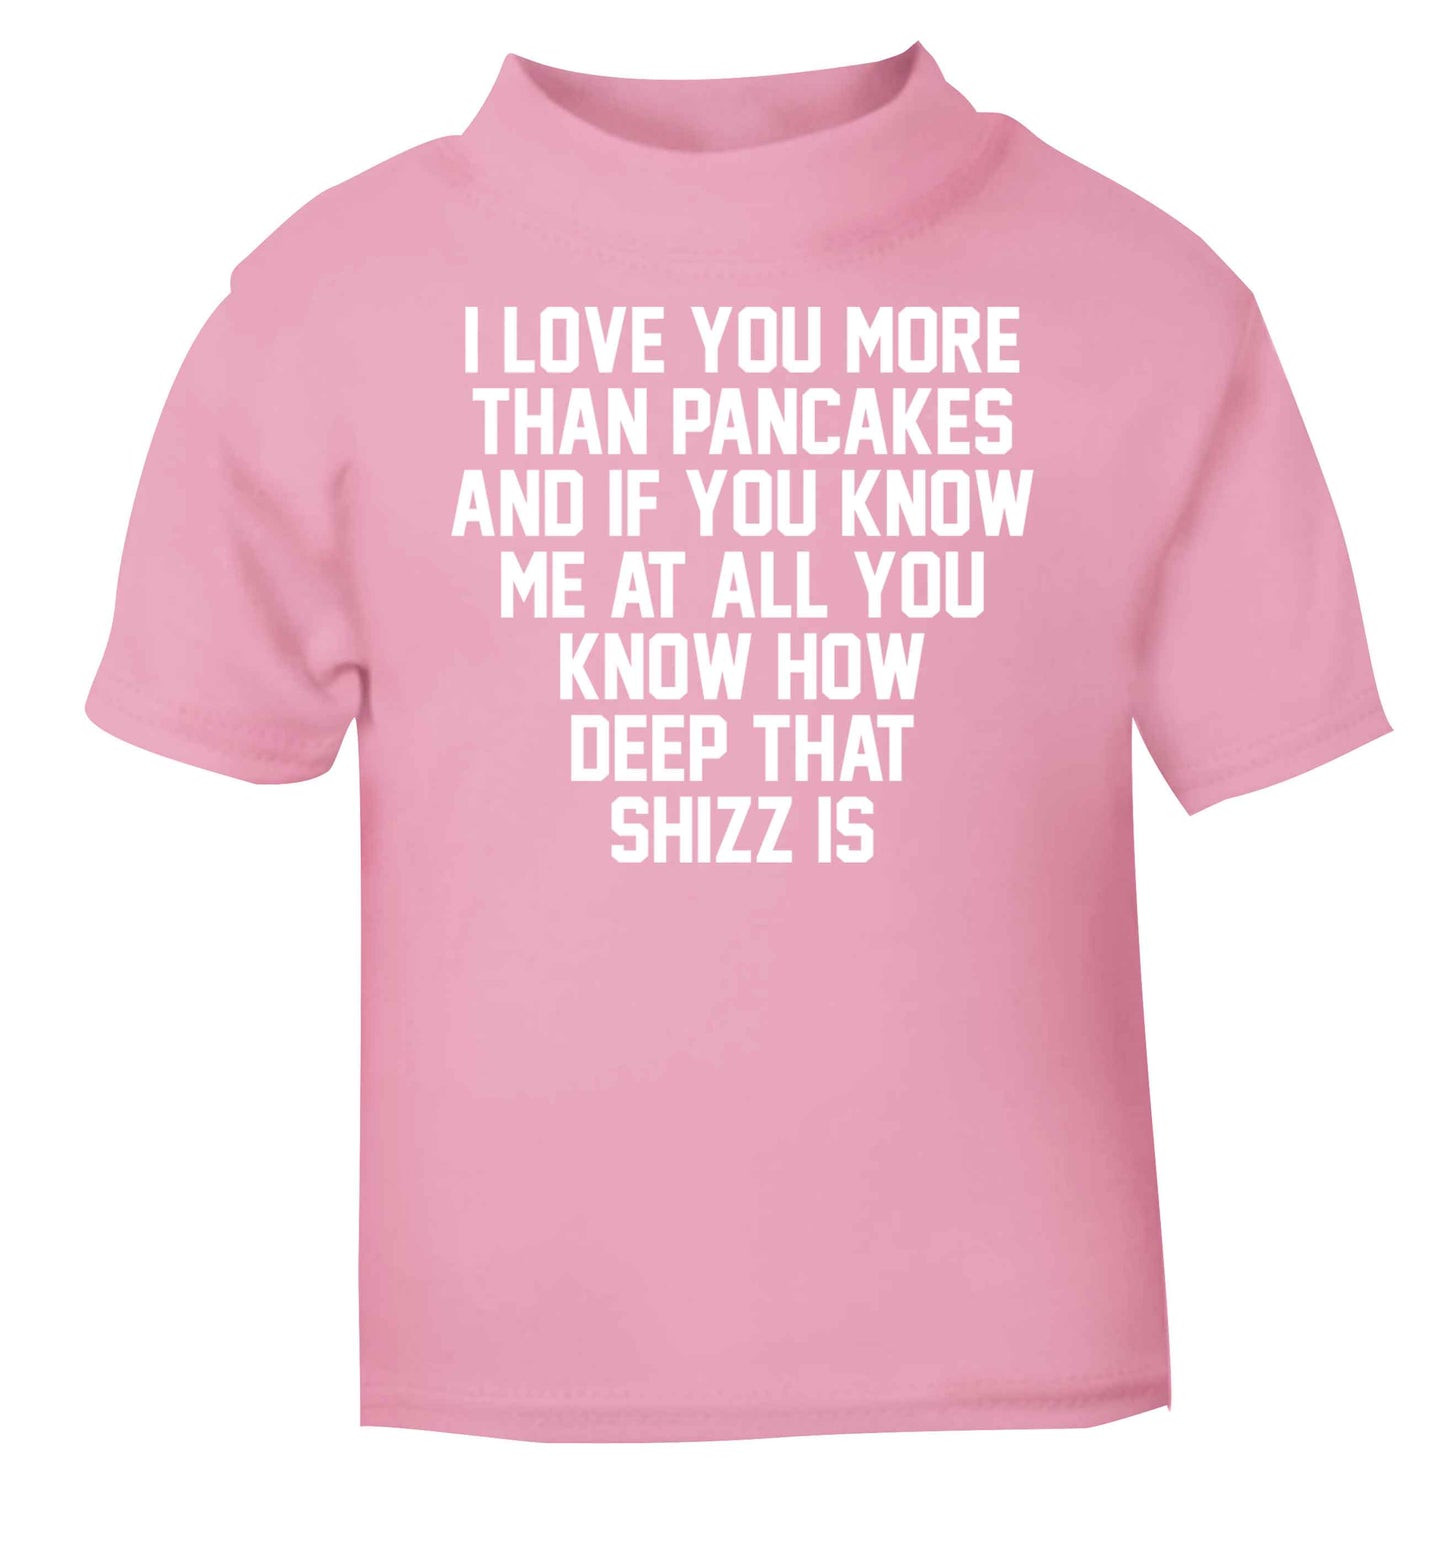 I love you more than pancakes and if you know me at all you know how deep that shizz is light pink baby toddler Tshirt 2 Years